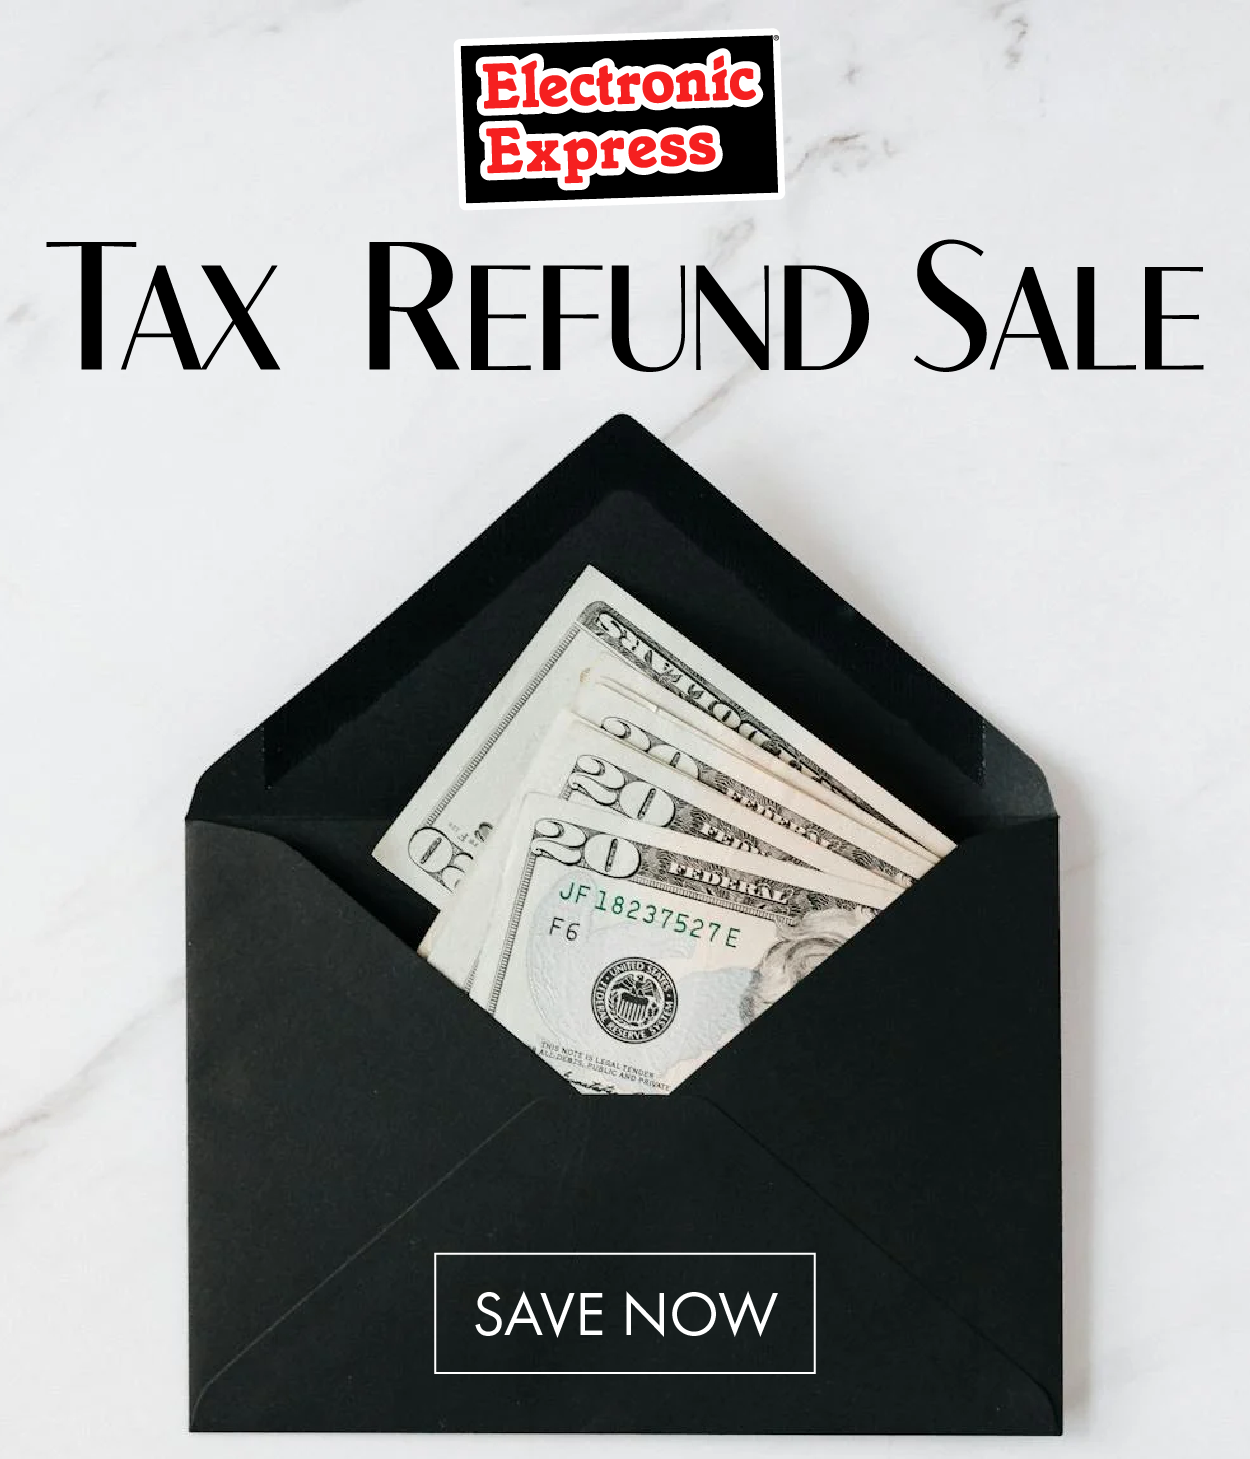 See our Tax Refund Sale at Electronic Express!